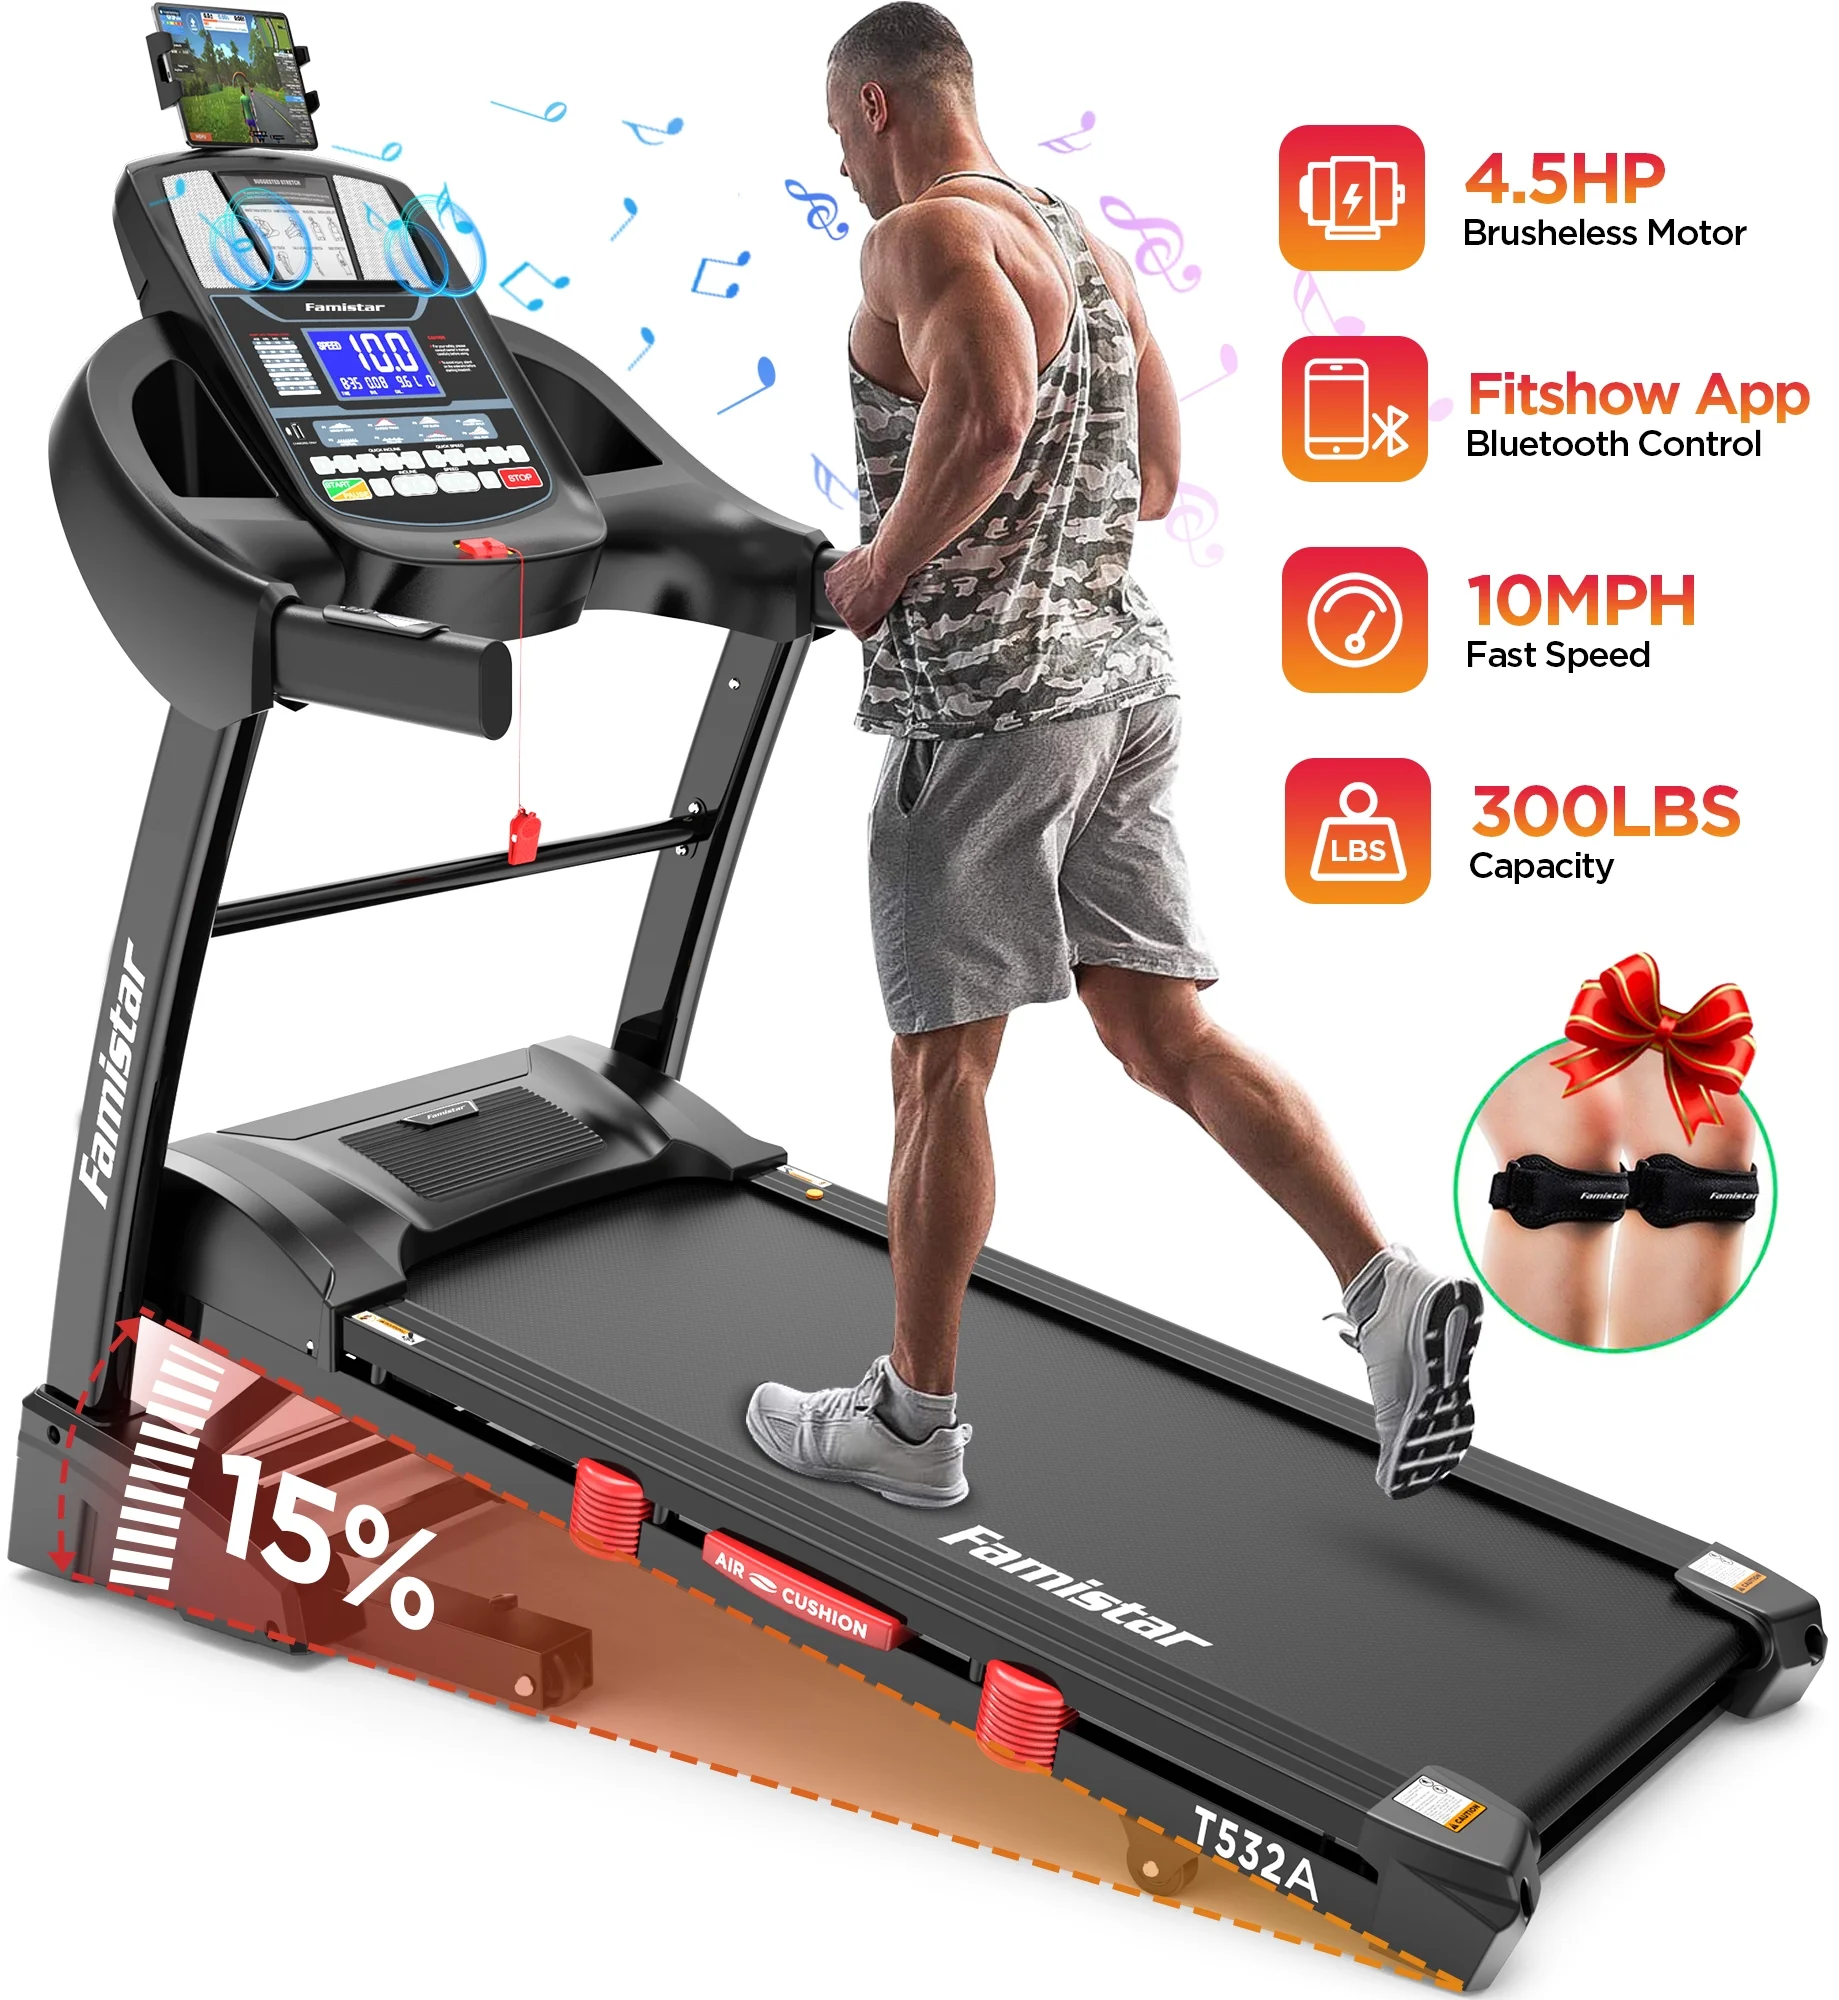 Famistar 4.5HP Folding Treadmill w/ APP control Portable Foldable, 15 Levels Auto Incline Treadmill for Home Office, 300lbs Capacity, Adjustable iPad Holder, Max 10MPH Speed, Knee Strap Gift